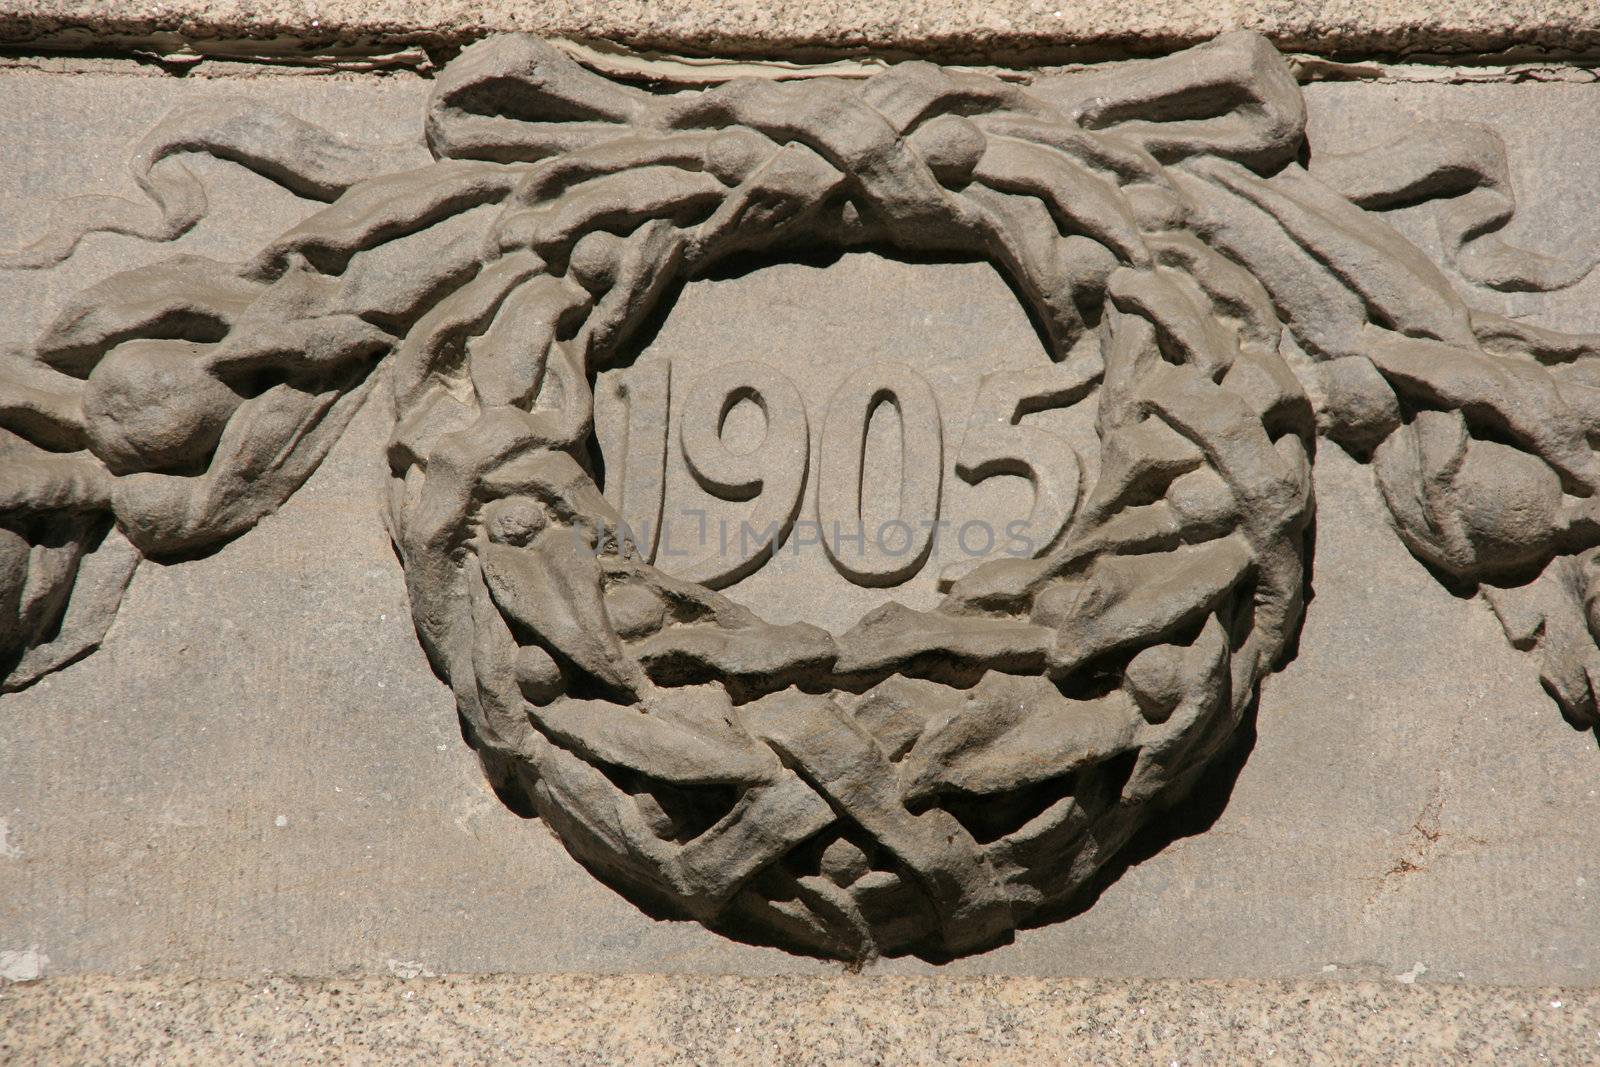 Year 1905 - bas relief decoration on a building in Dublin